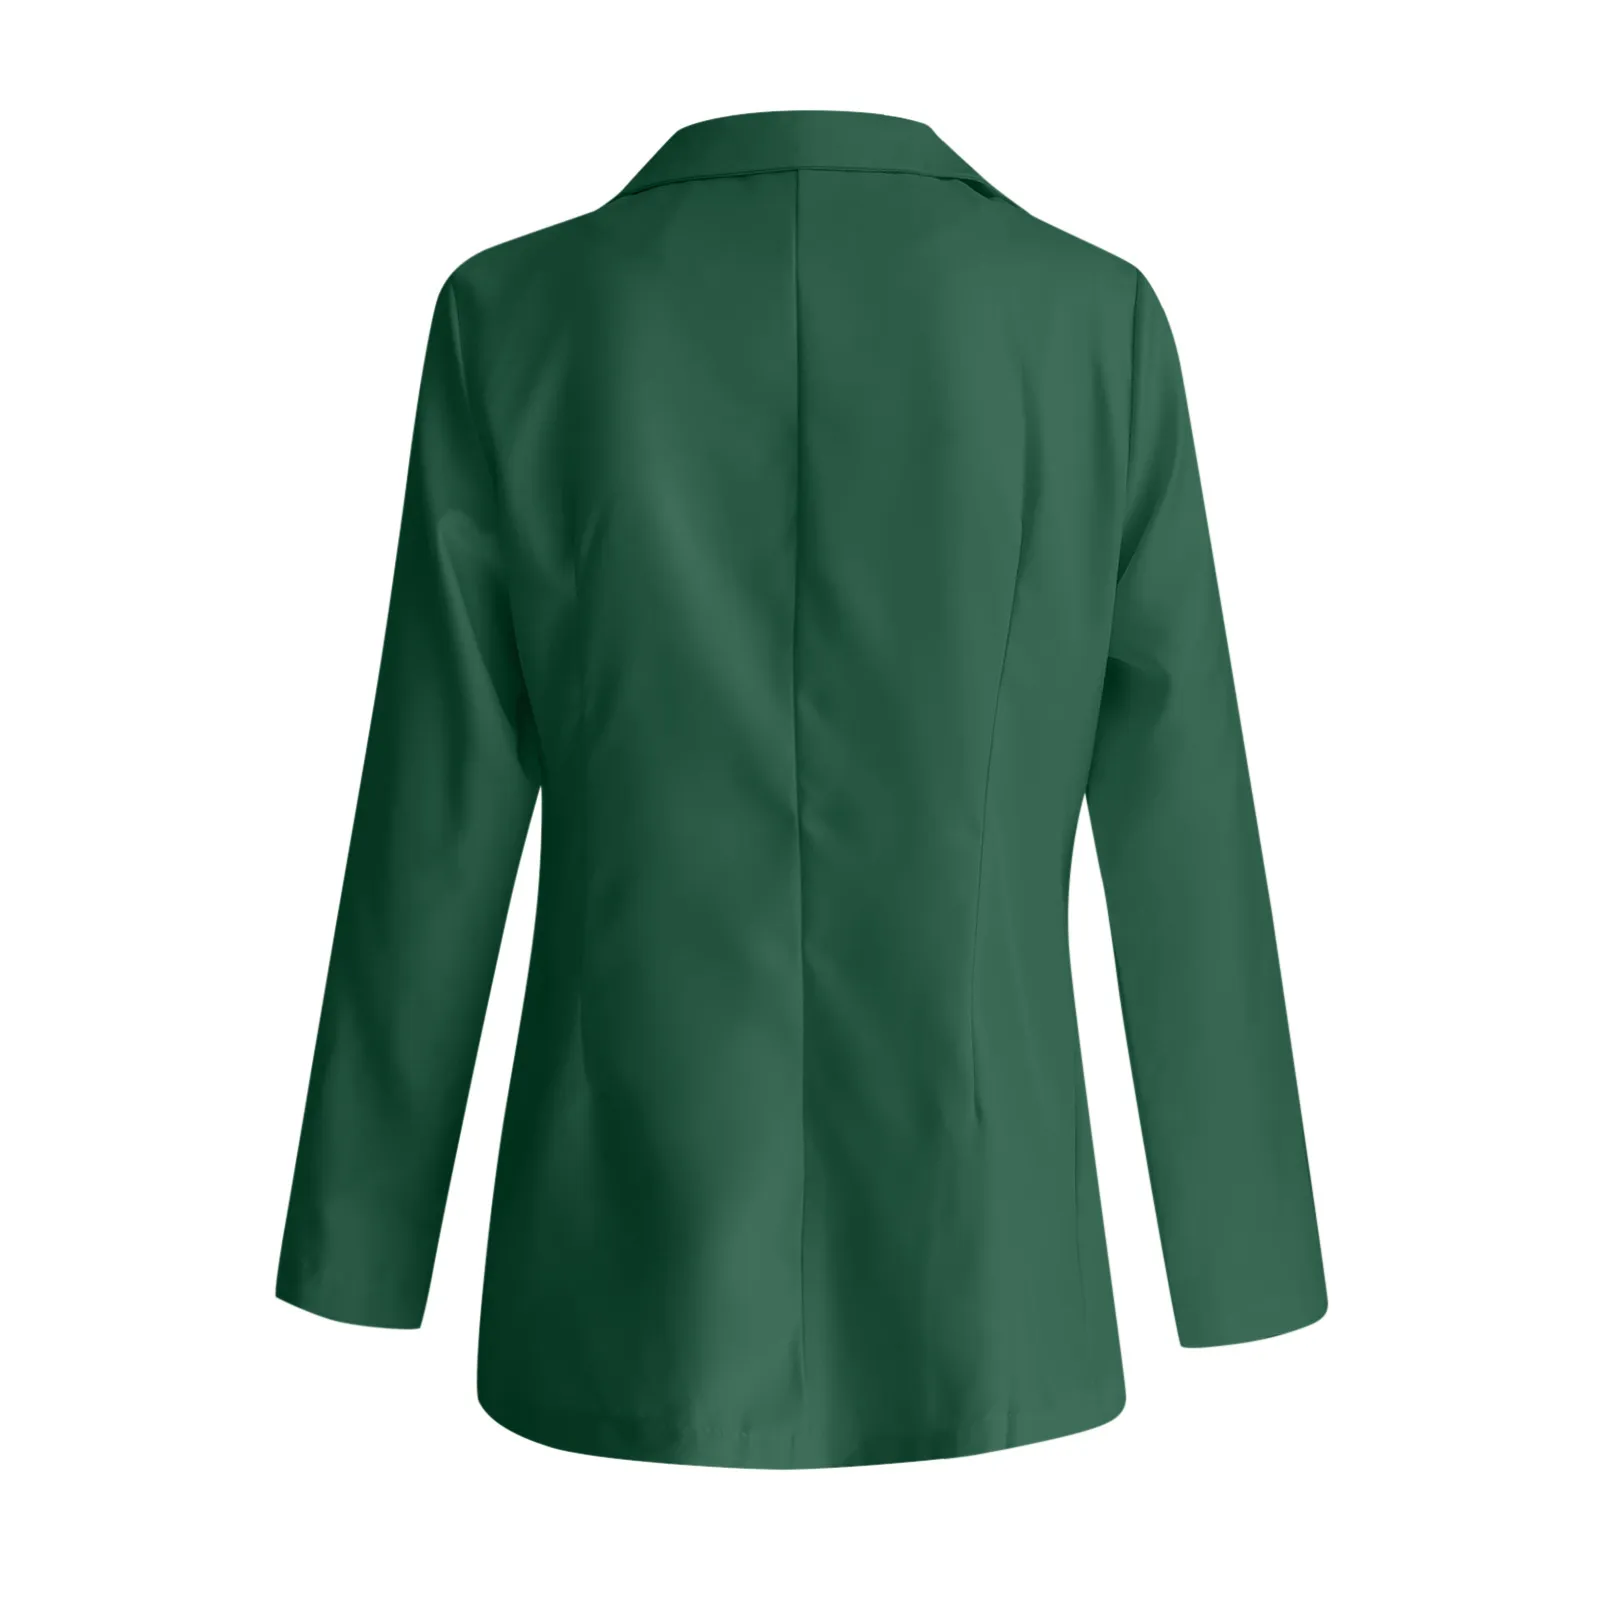 South Butt Jacket Women's Casual Light Weight Thin Jacket Slim Coat Long Sleeve Blazer Office Pant Suits for Women Dressy